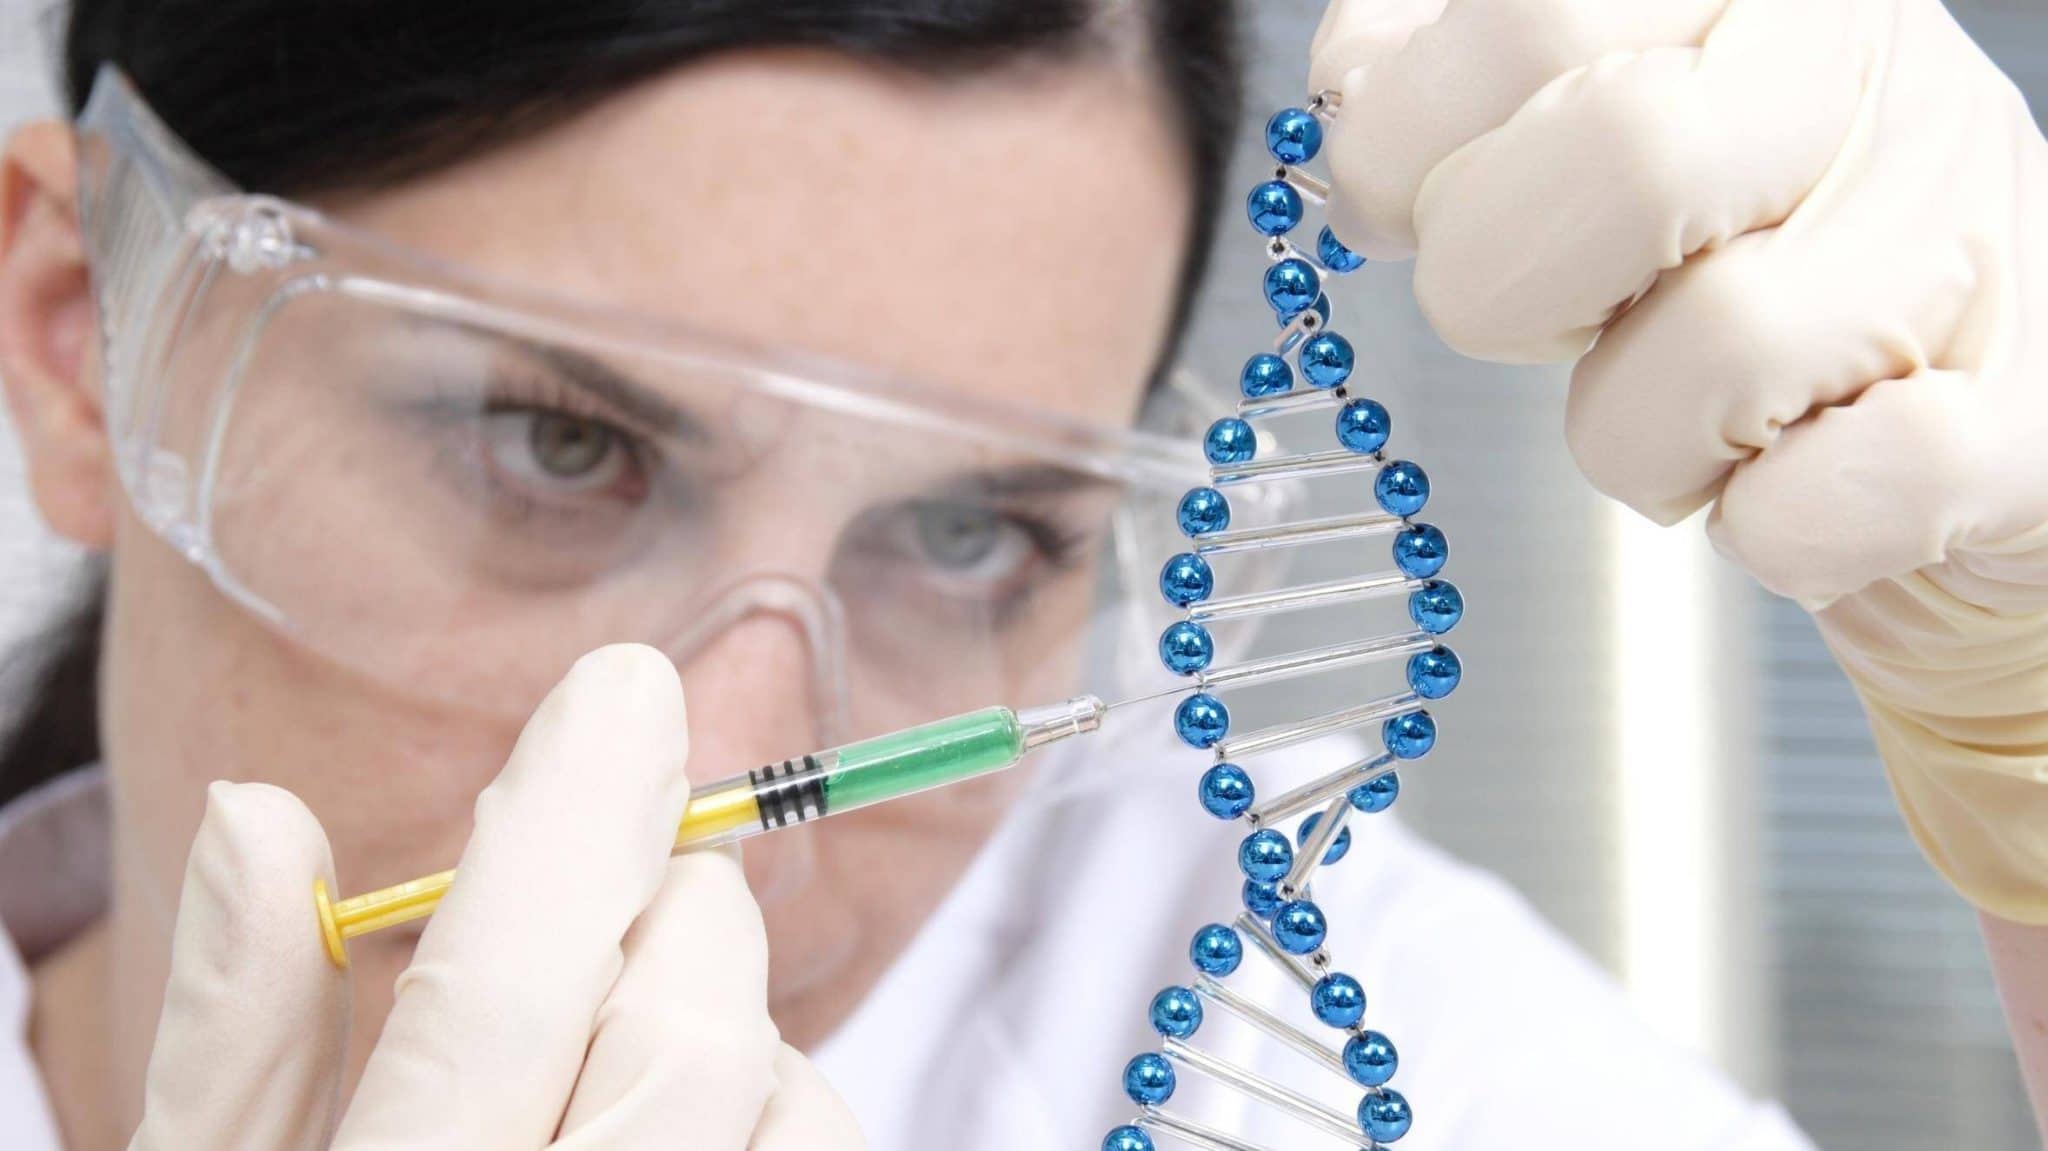 Picture of a woman editing DNA, example of CRISPR technology.